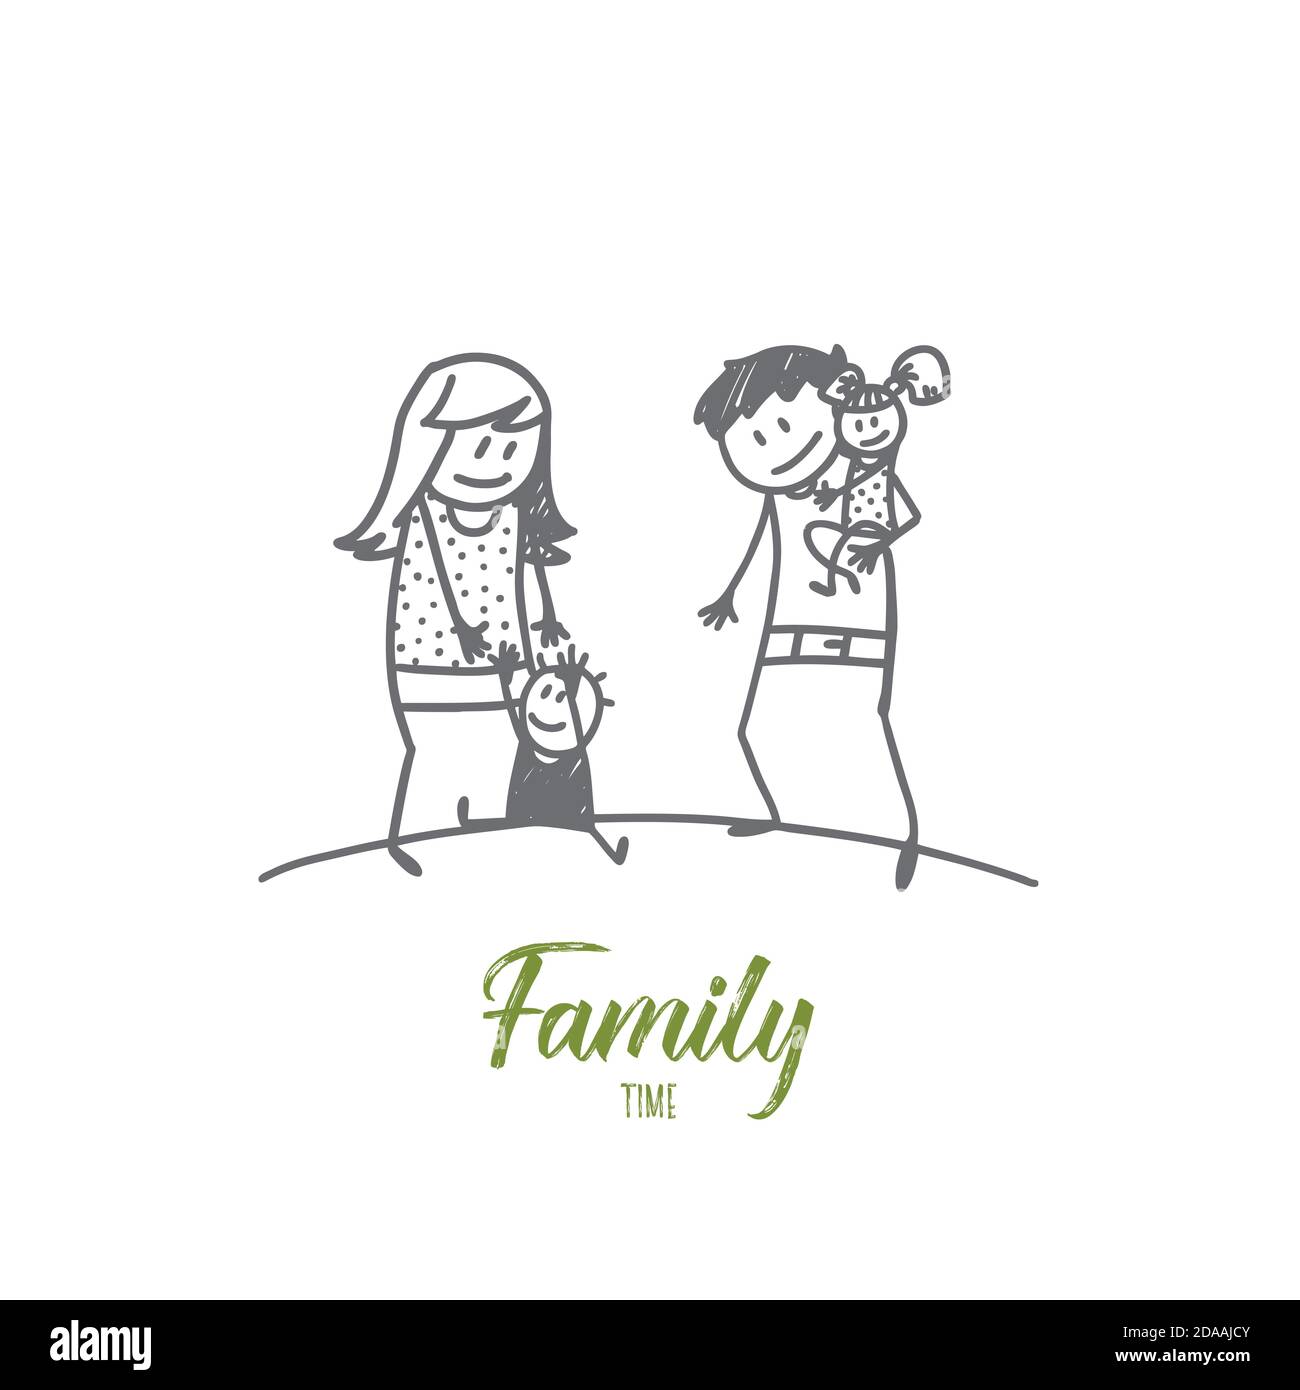 Family affection sketch  Easy love drawings Meaningful drawings Art drawings  sketches simple